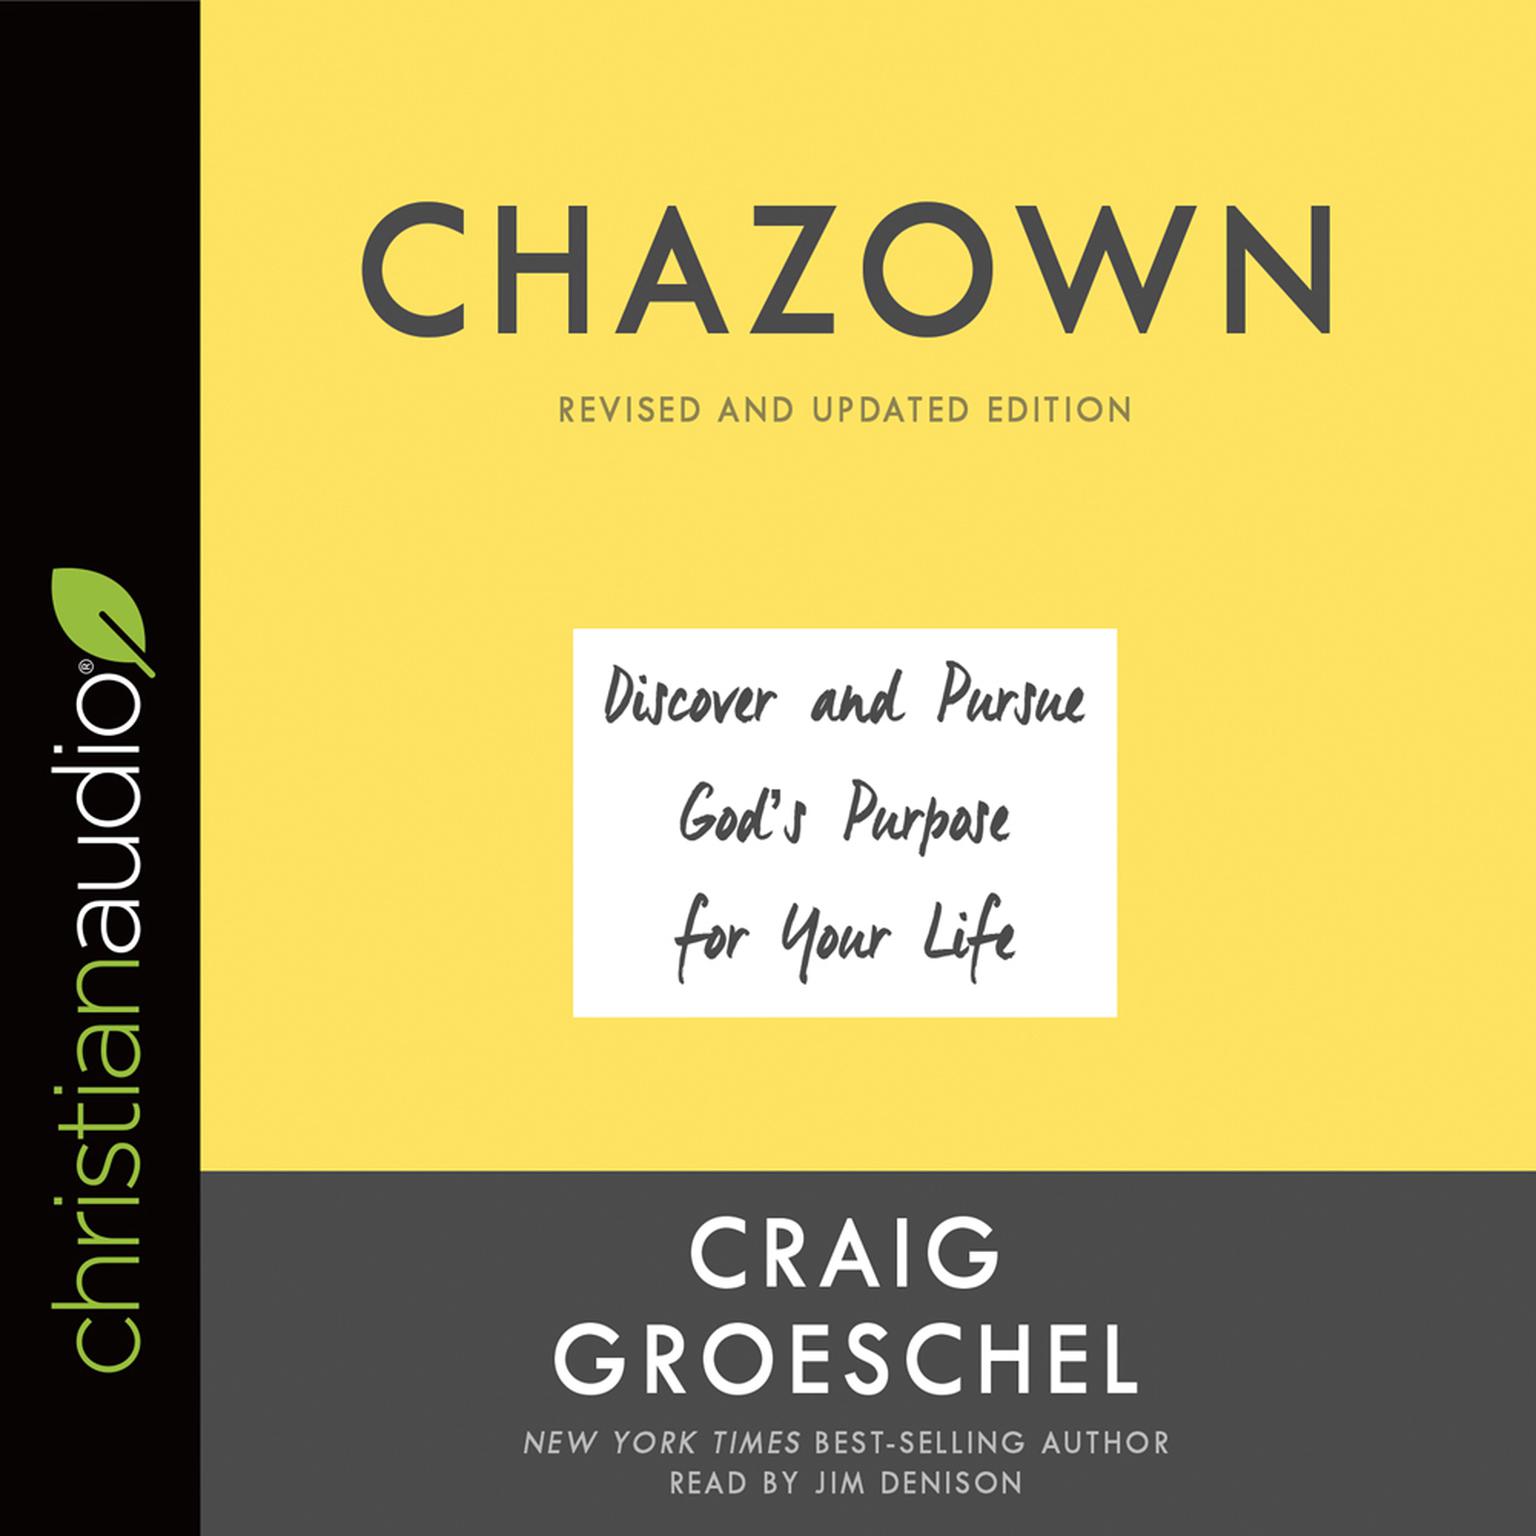 Chazown, Revised and Updated Edition: Discover and Pursue Gods Purpose for Your Life Audiobook, by Craig Groeschel